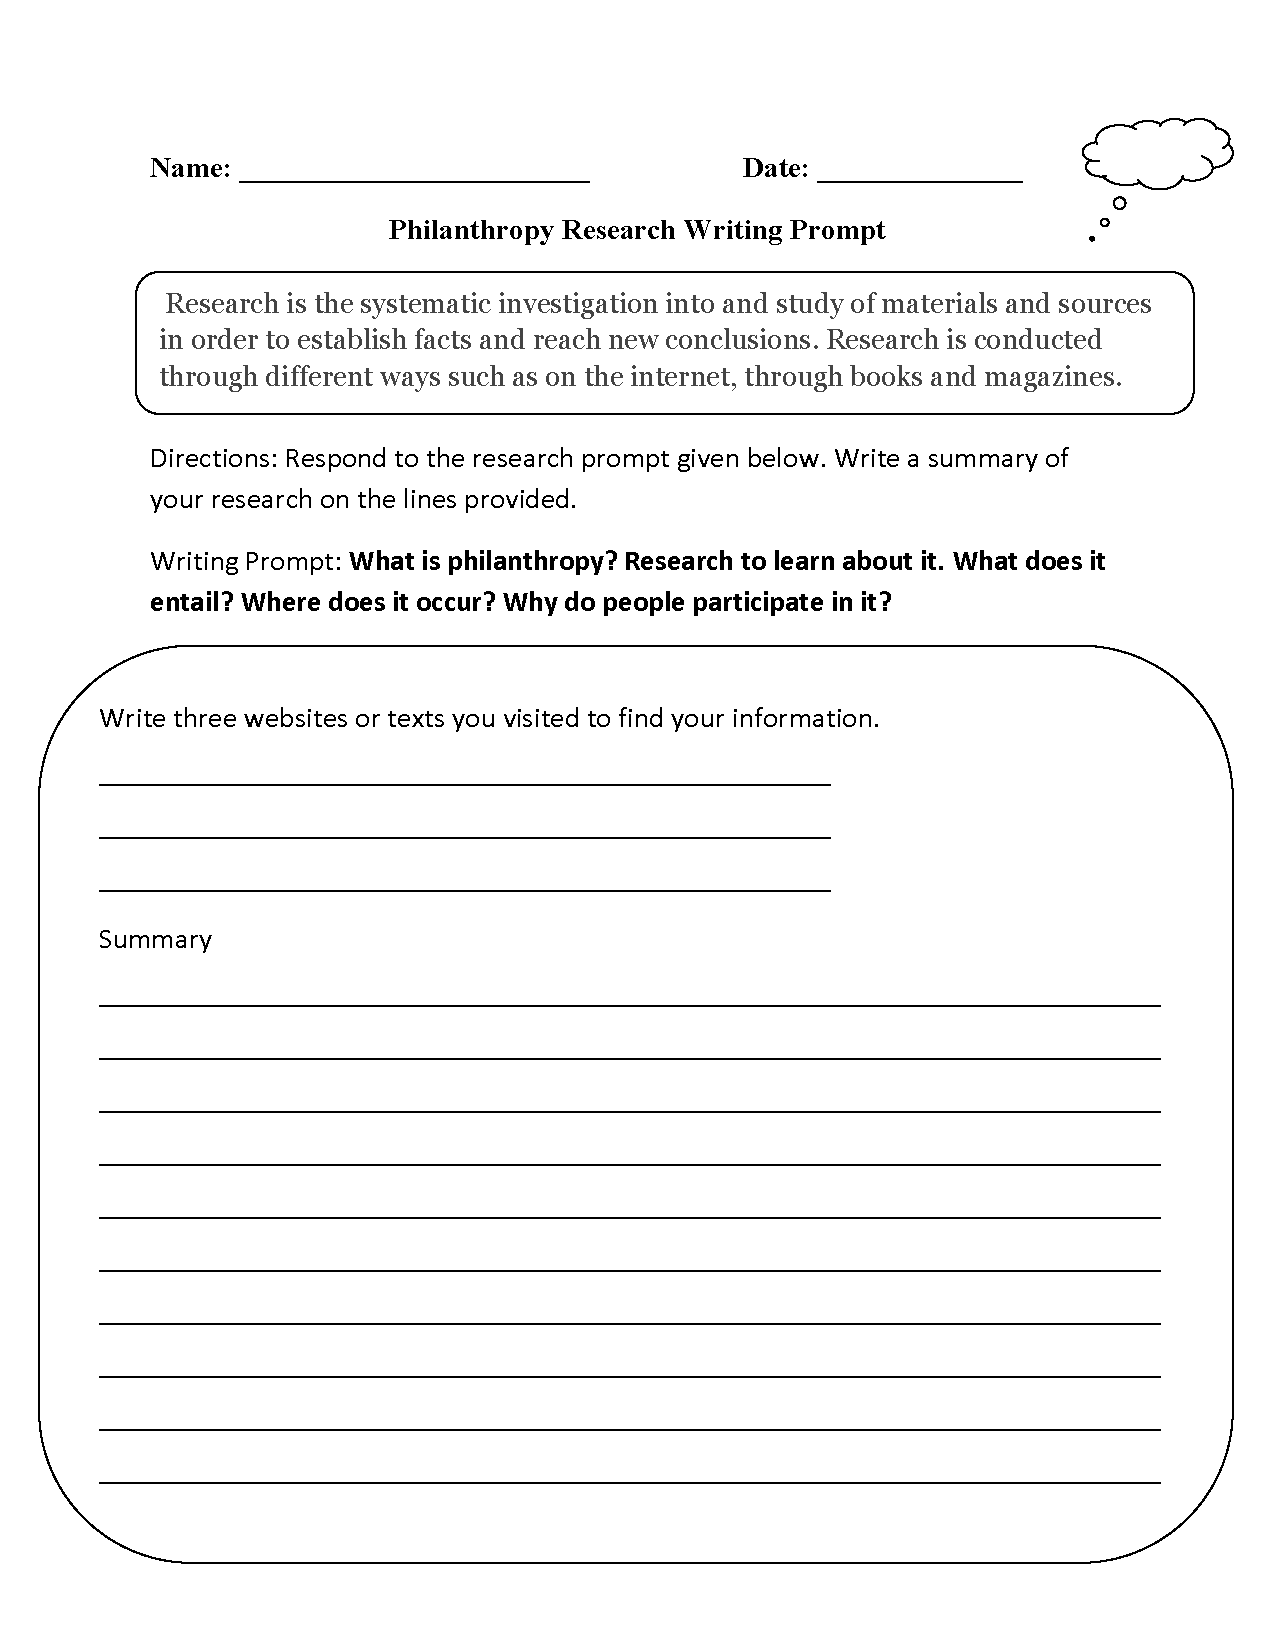 Philanthropy Research Writing Prompts Worksheets